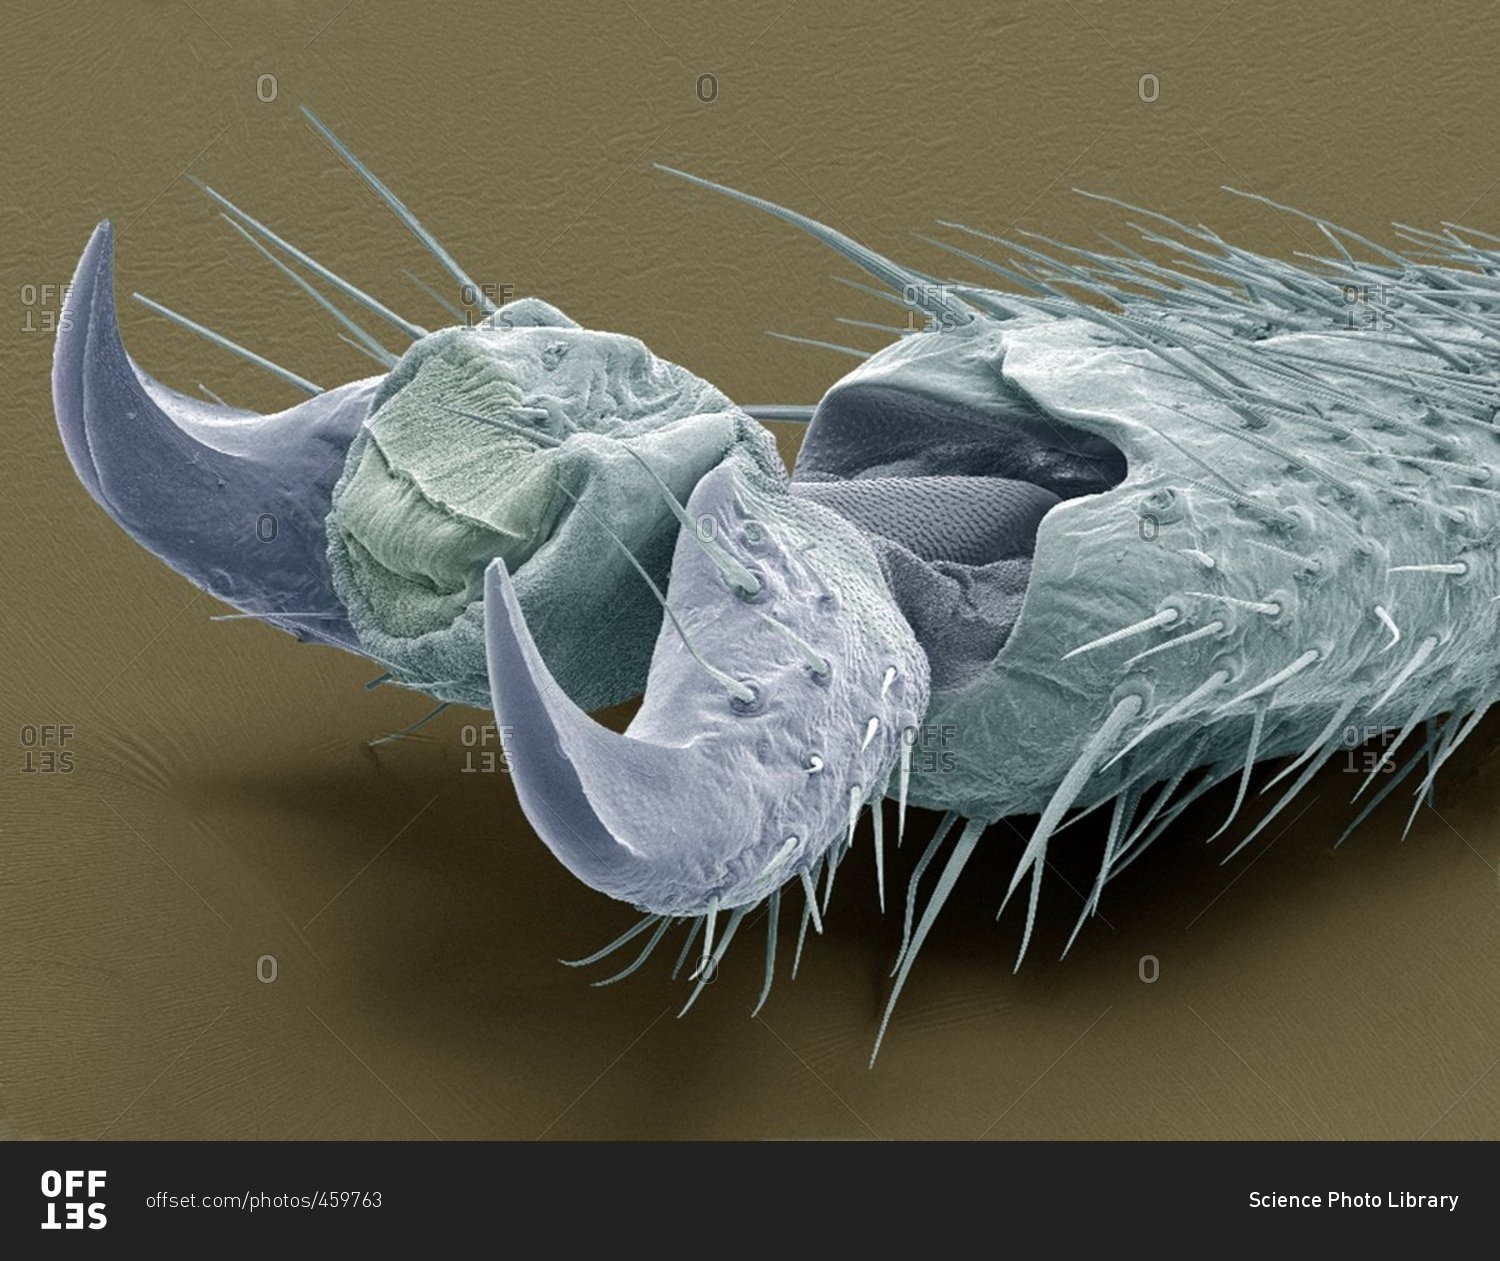 Stick insect foot, colored scanning electron micrograph (SEM) The large claws are used for climbing